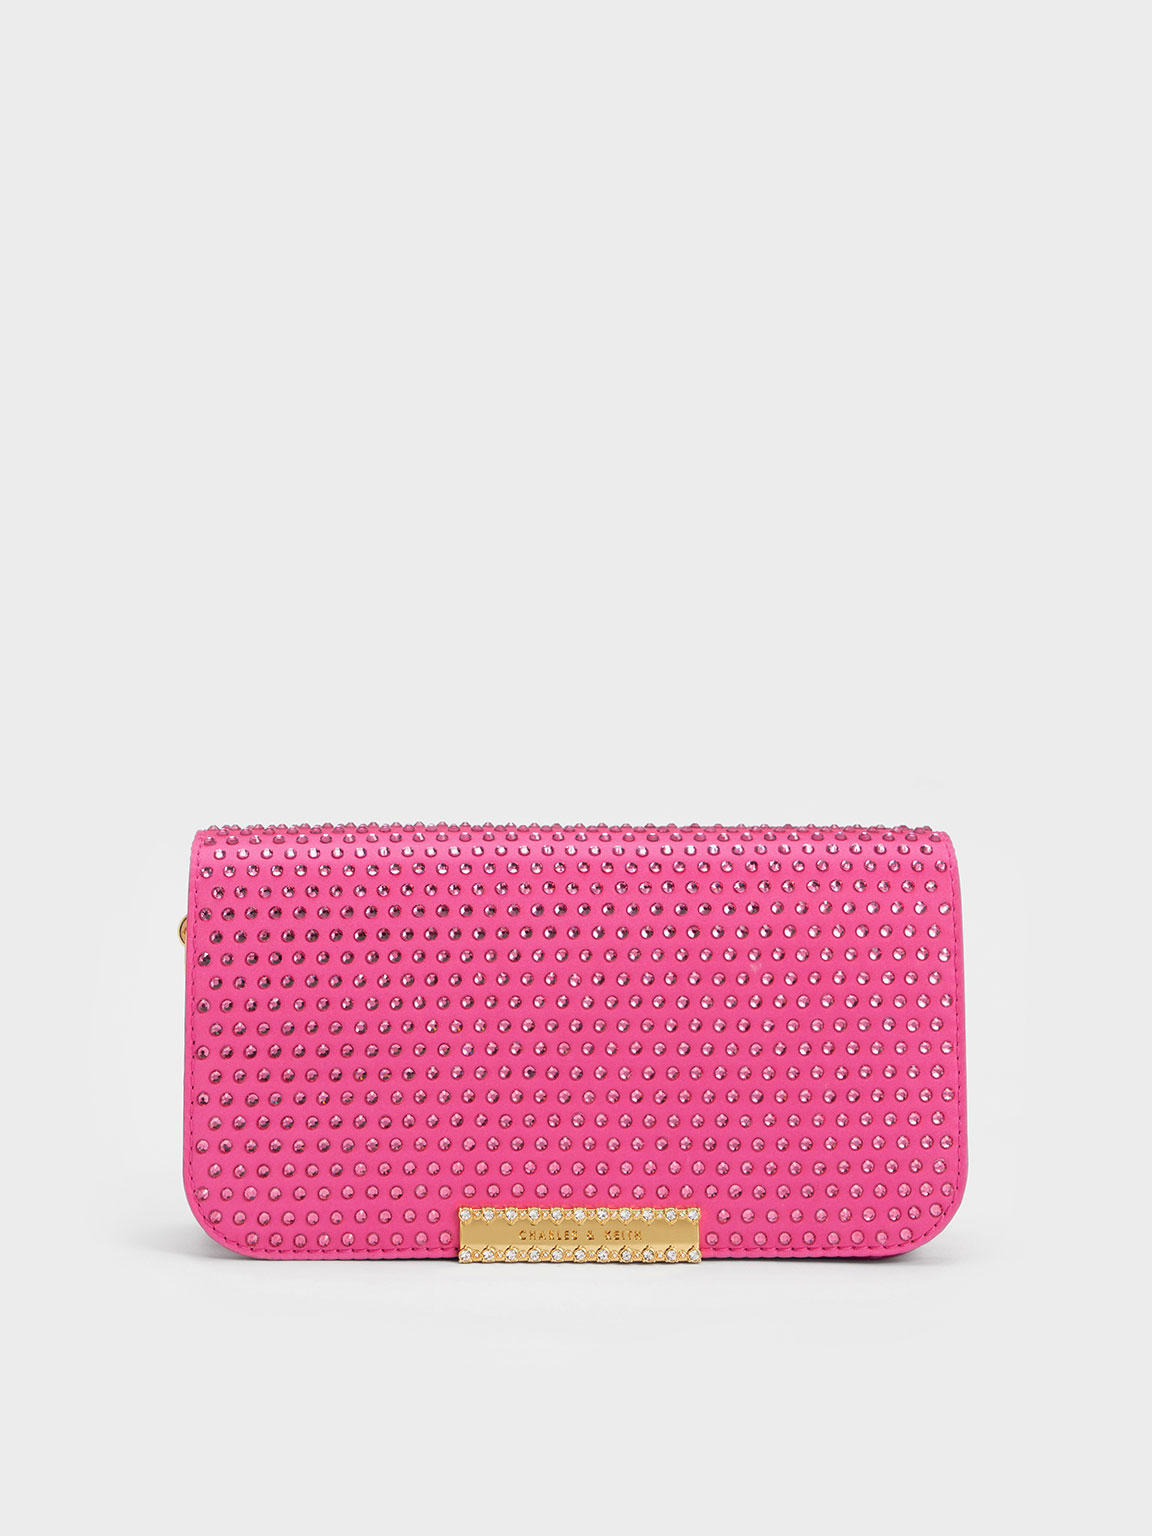 Charles & Keith Embellished Chain Strap Bag In Fuchsia